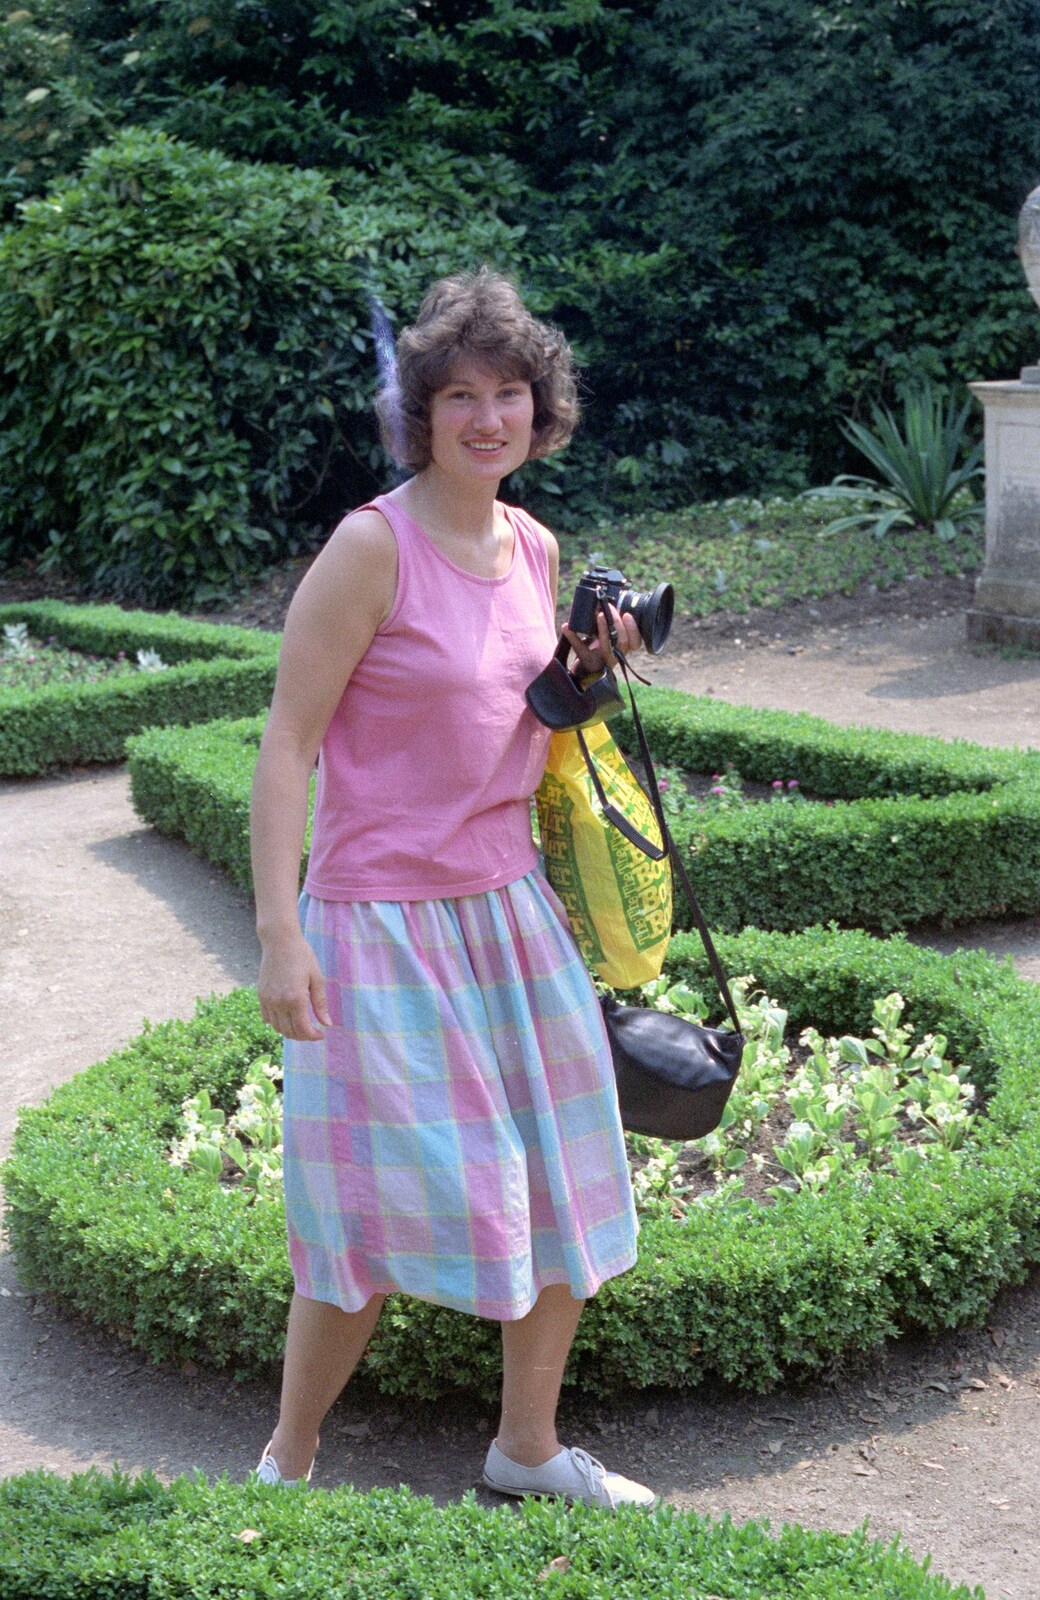 Angela roams around with a camera from Uni: A Trip to Mount Edgcumbe, Cornwall - 17th June 1989